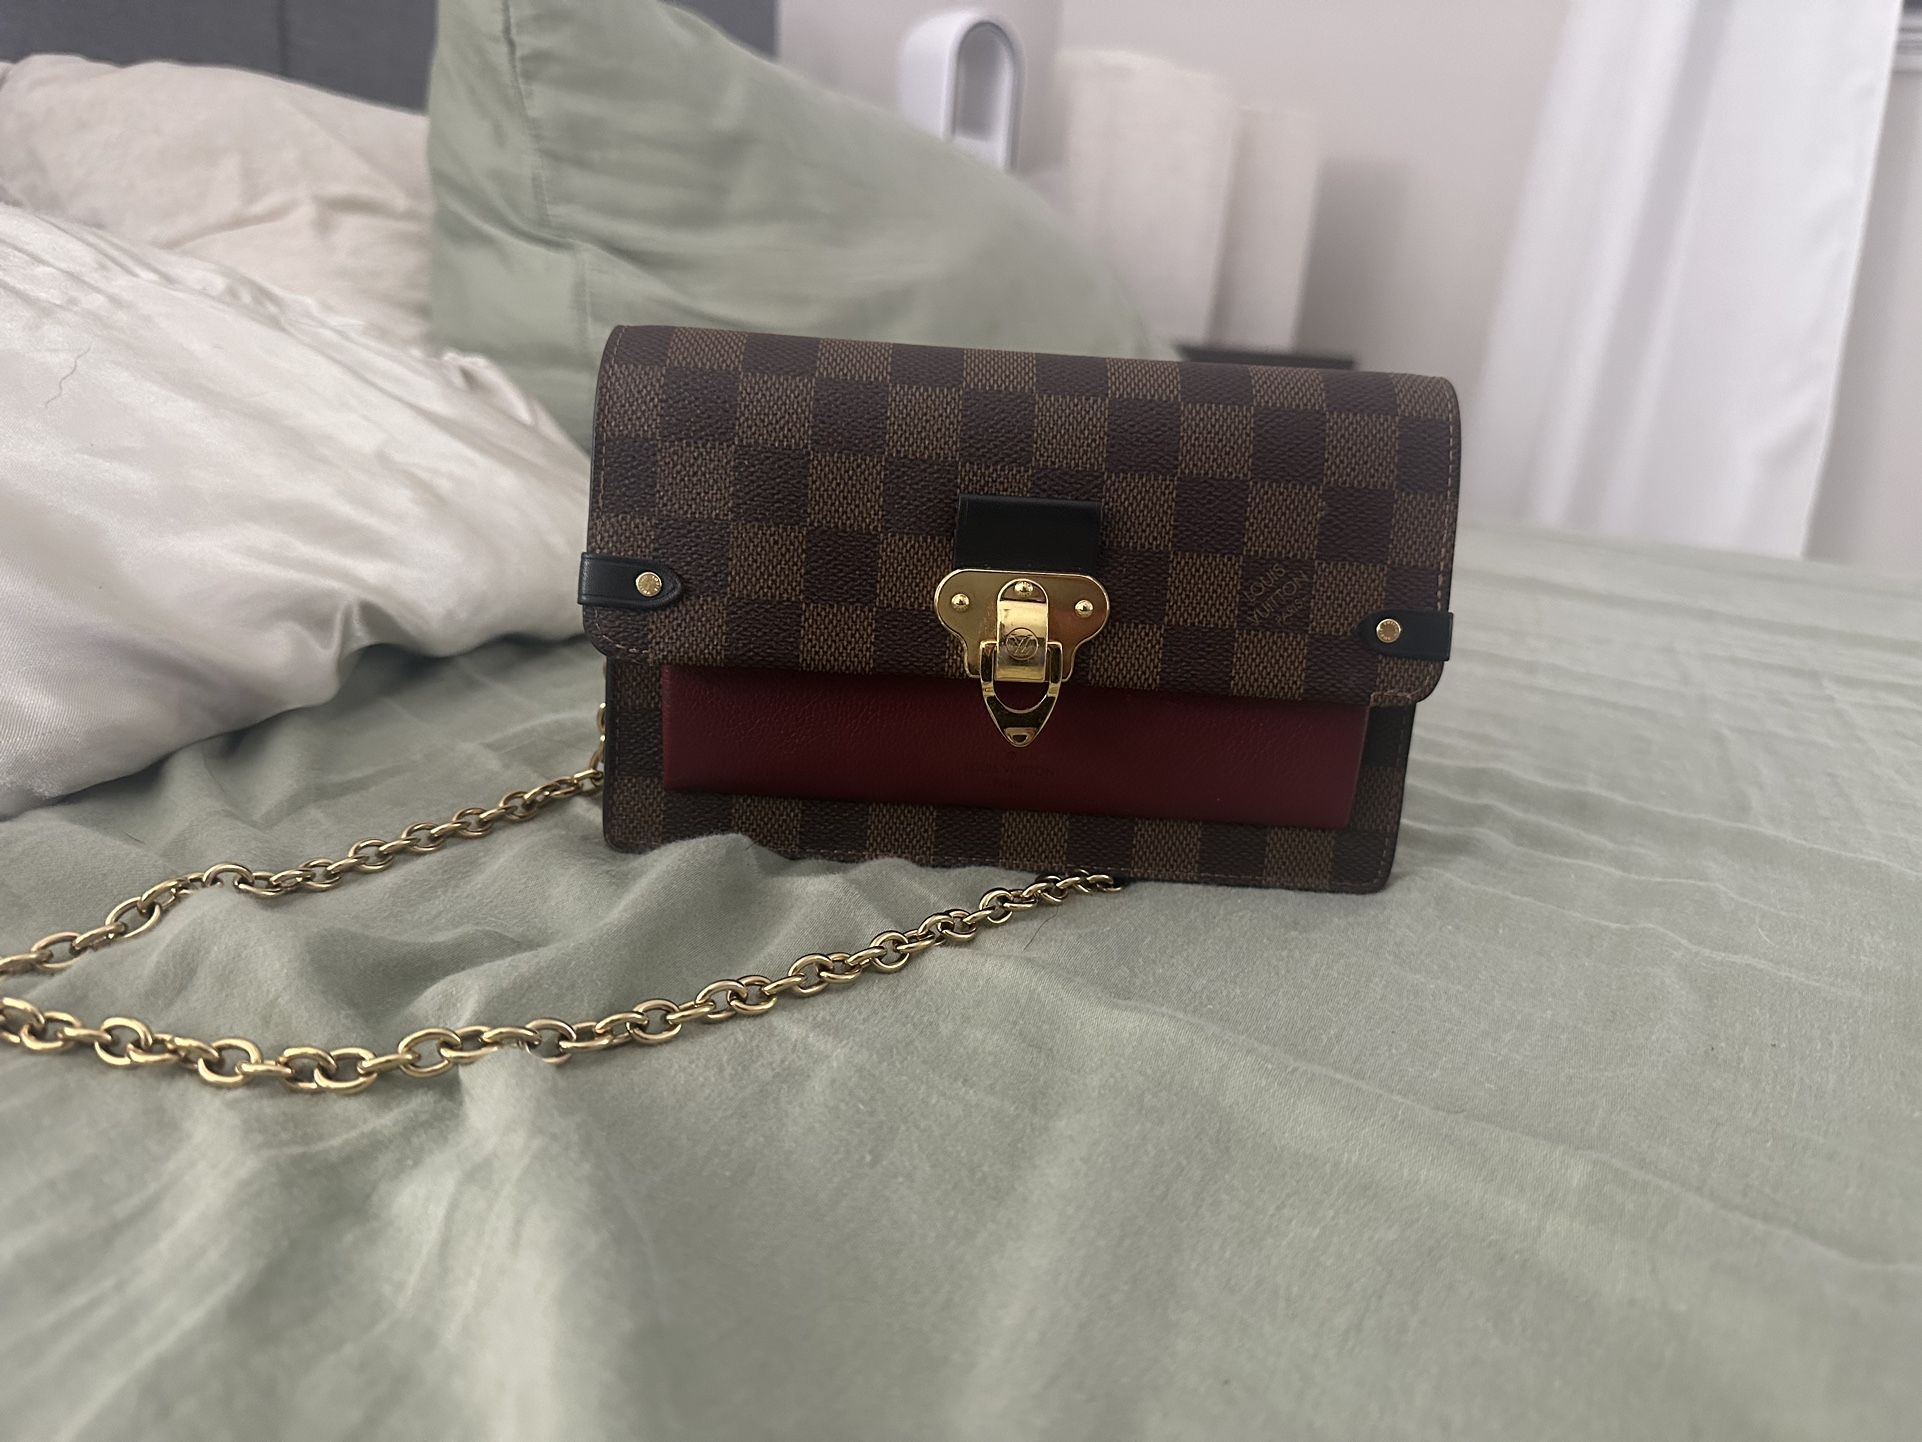 Louis Vuitton Bags 3 Piece Set Brand New for Sale in Parma, OH - OfferUp